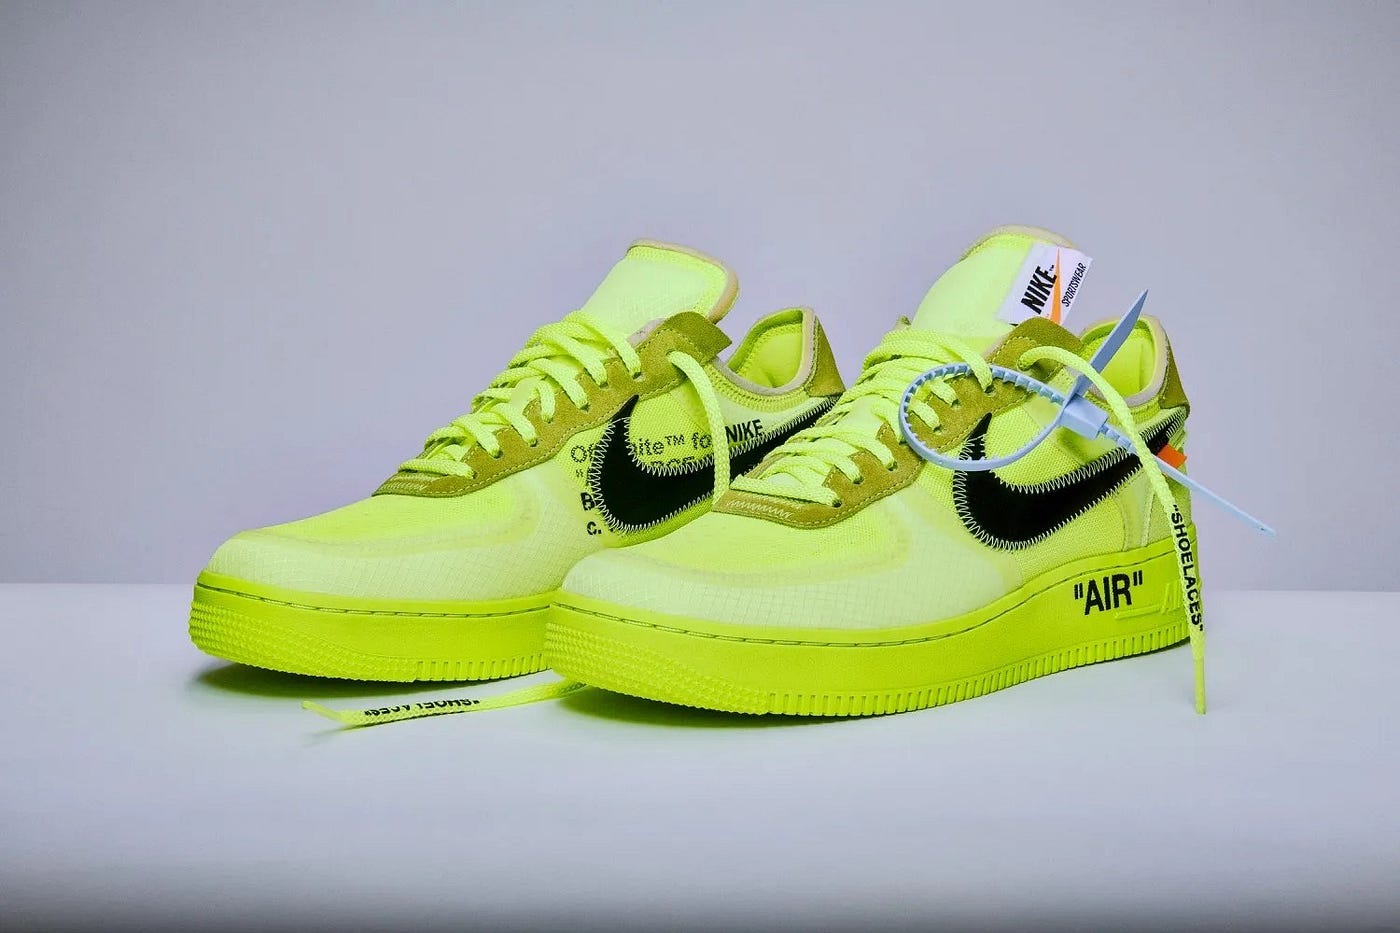 Make Way for the Off-White x Nike Air Force 1 Low Green Sneakers